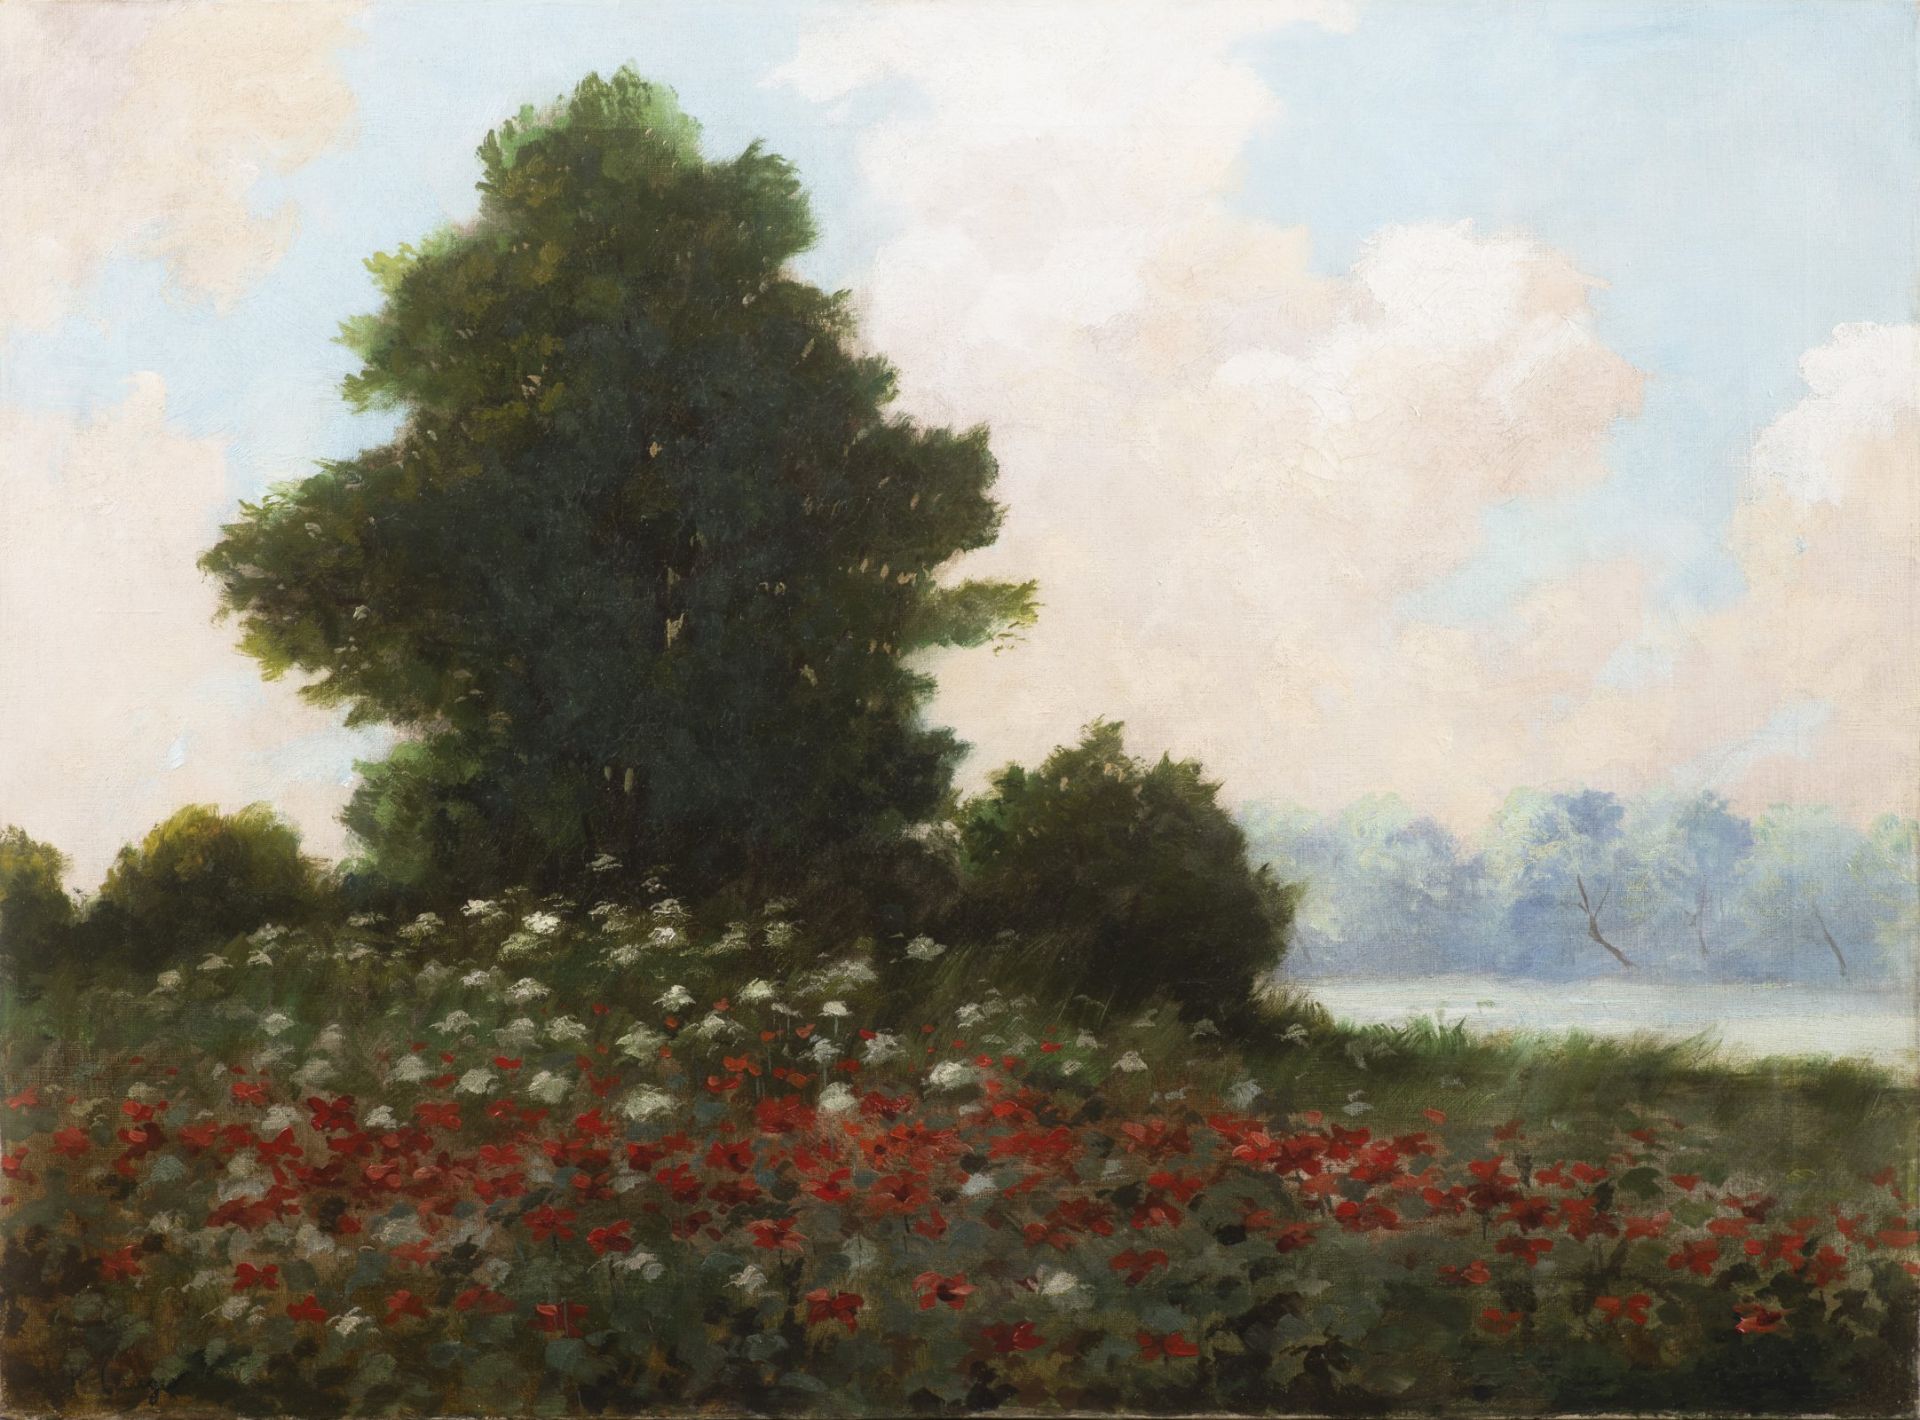 KAREL LANGER 1878 - 1947: BLOOMING MEADOW Before 1910 Oil on canvas 52,5 x 70,5 cm Signed: Lower